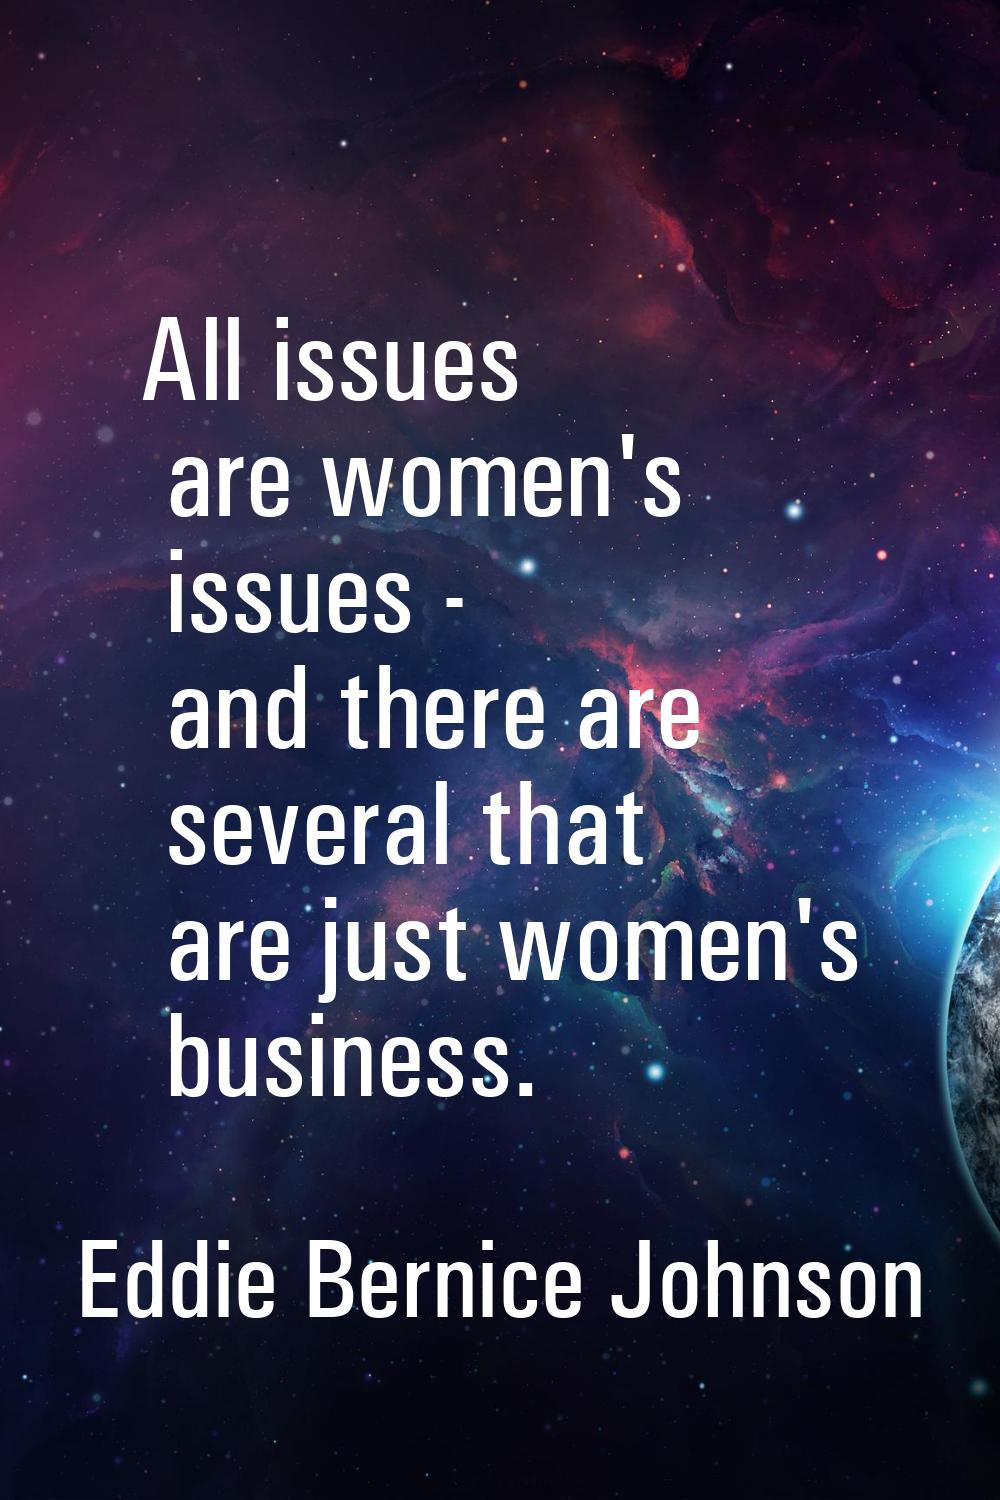 All issues are women's issues - and there are several that are just women's business.